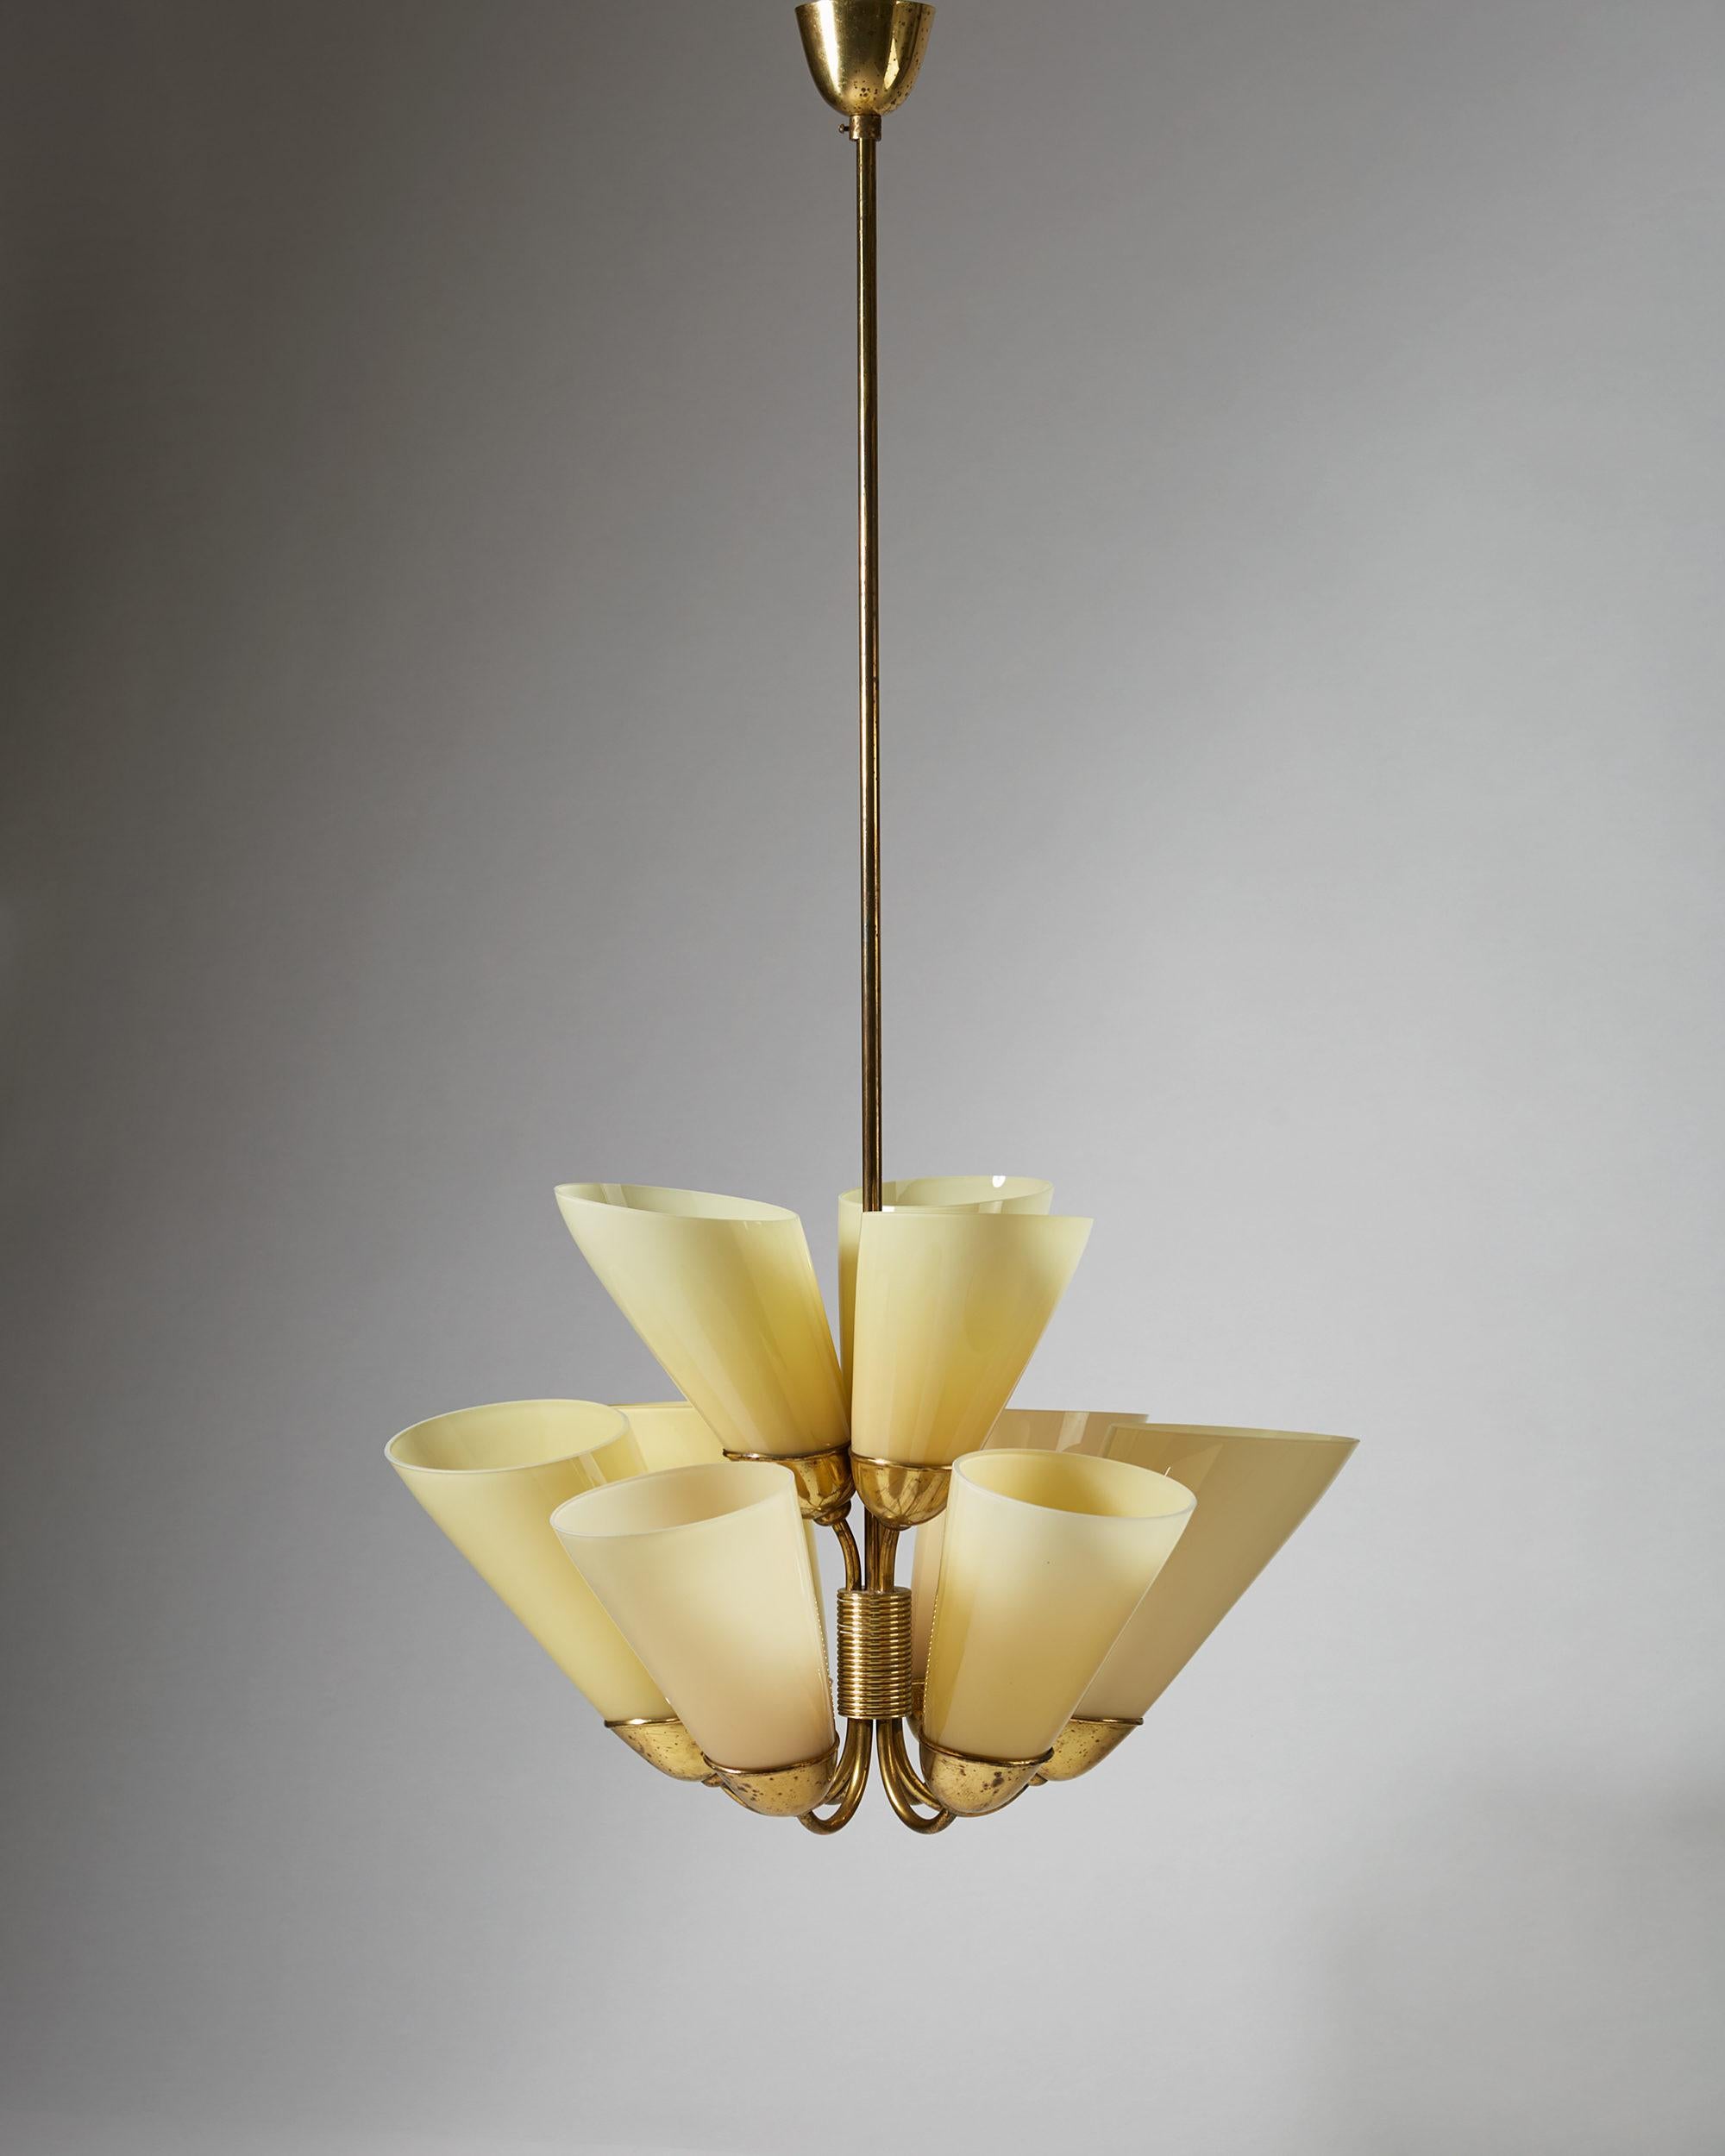 Chandelier model K1-40 designed by Mauri Almari for Idman, Finland, 1950s.
Brass and glass.

Measures: H 150 cm/ 4' 11 1/4